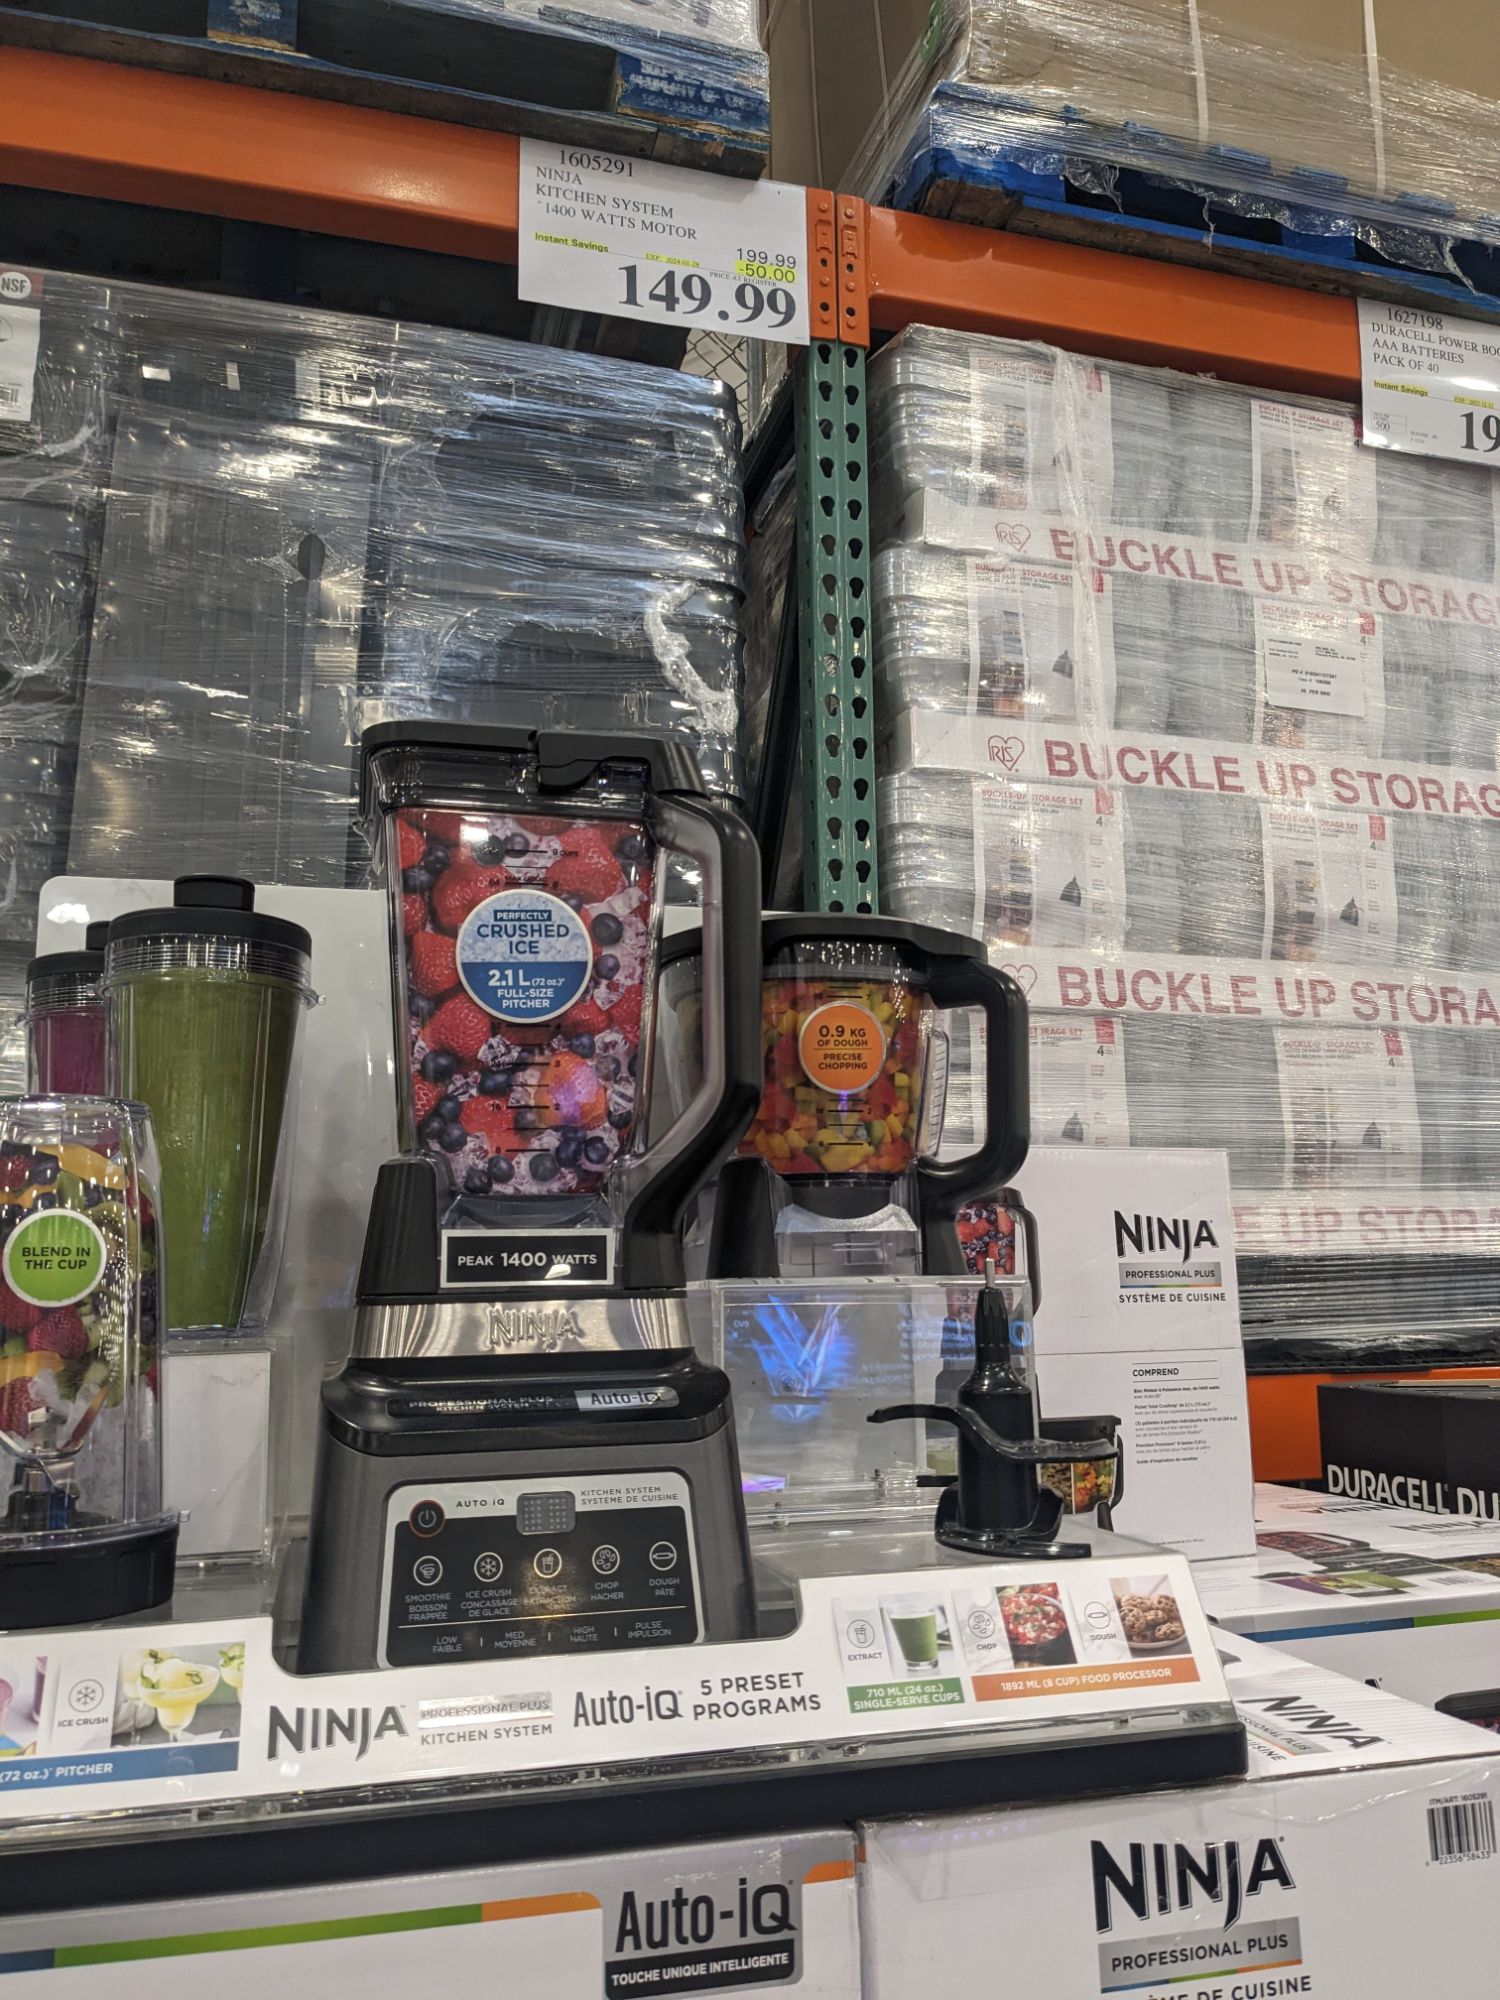 Weekly Winnipeg Costco Deals & Finds for March 30 - April 5, 2020